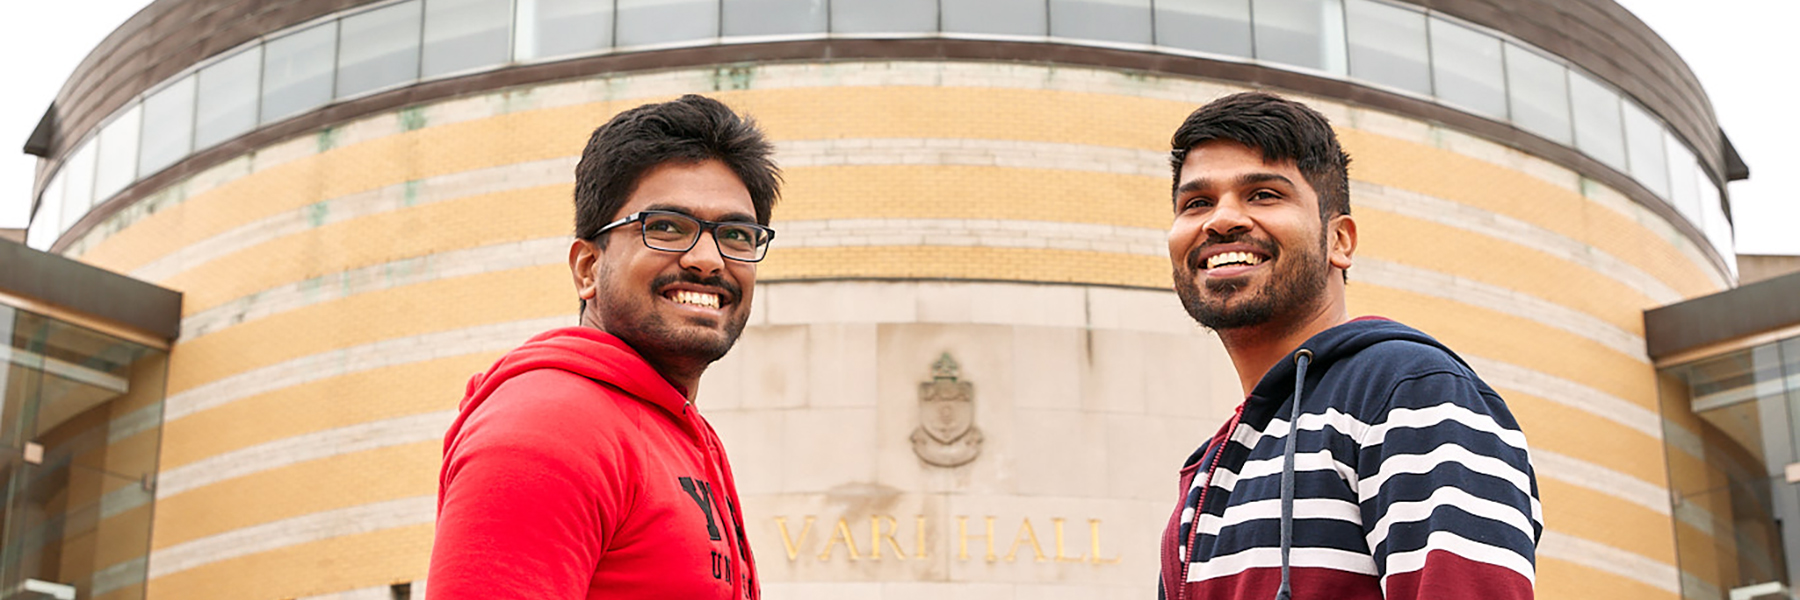 Two students in front of Vari Hall